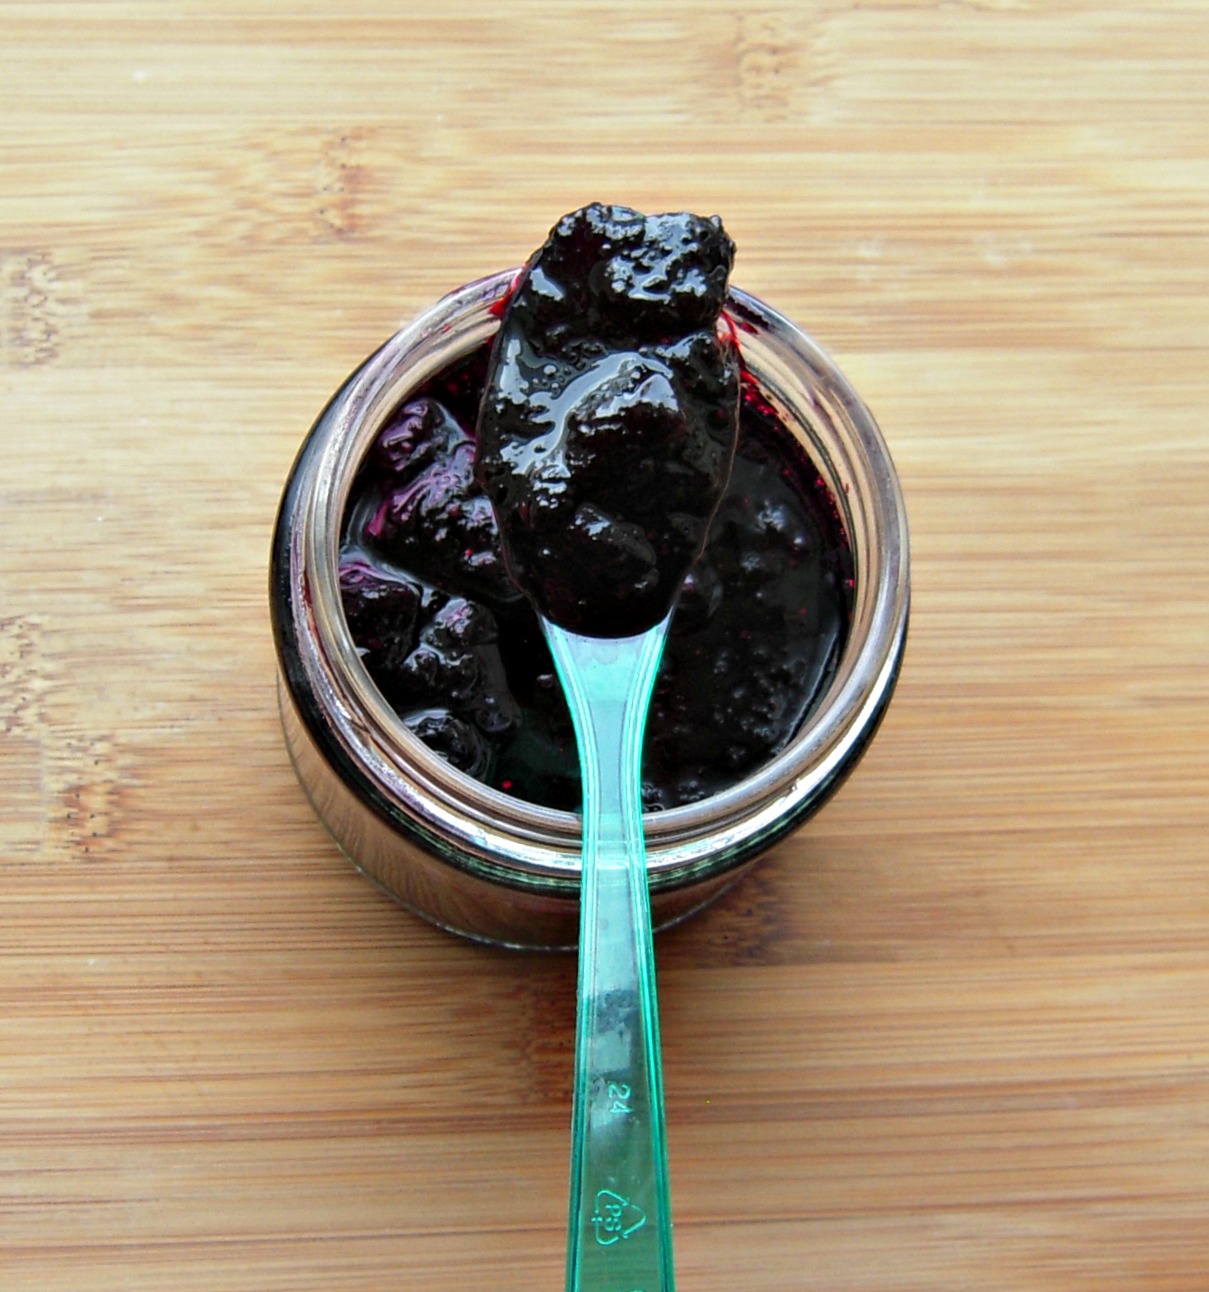 Homemade Blueberry Jam Using Only 4 Ingredients!